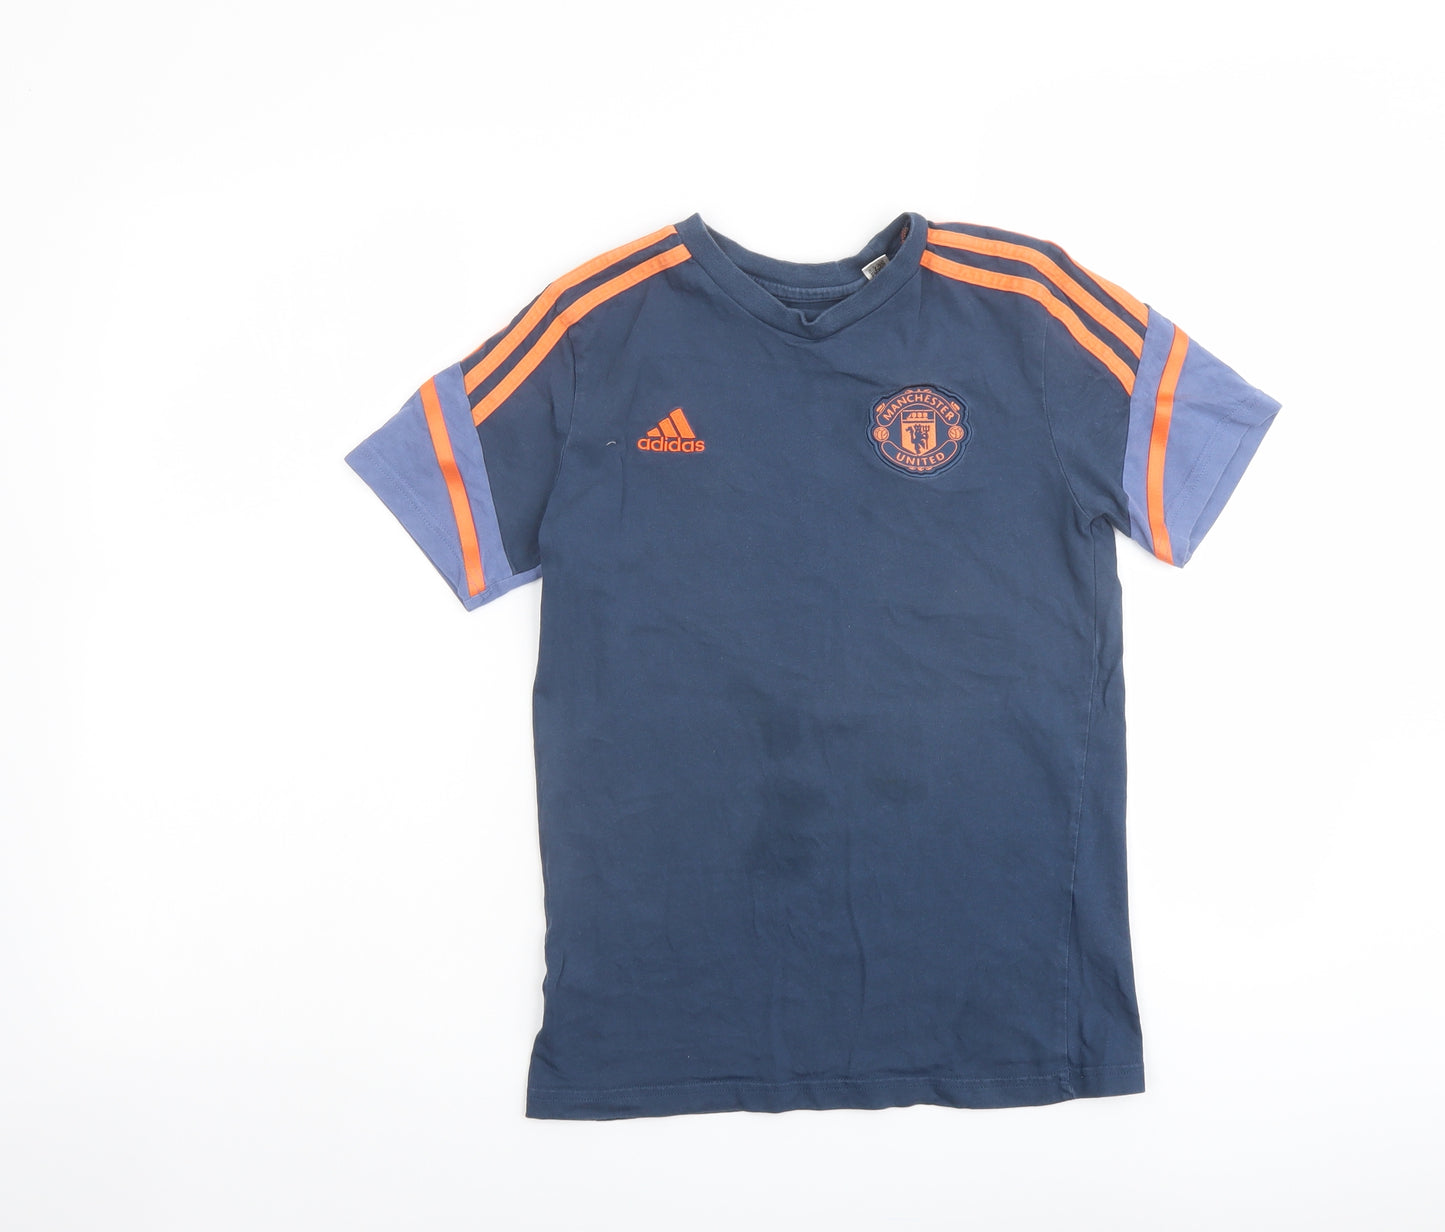 adidas Boys Blue Cotton Basic T-Shirt Size 11-12 Years Round Neck Pullover - Manchester United